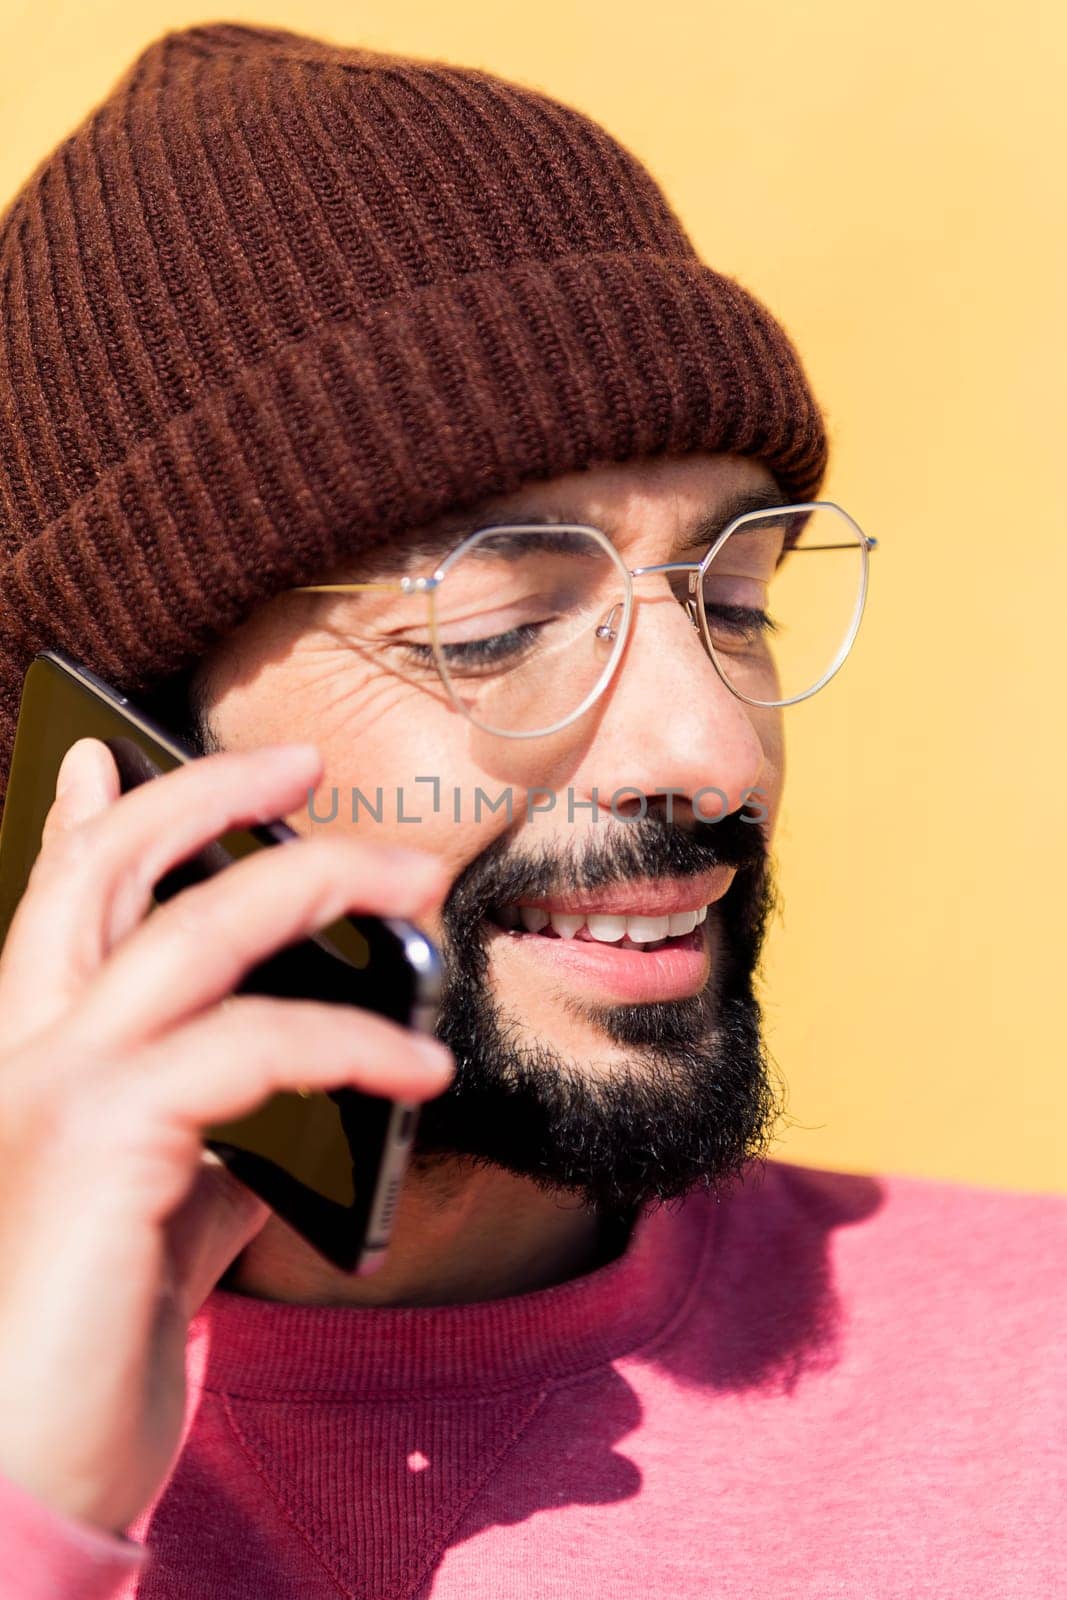 smiling young man talking on mobile phone in a yellow background, concept of technology of communication and modern lifestyle